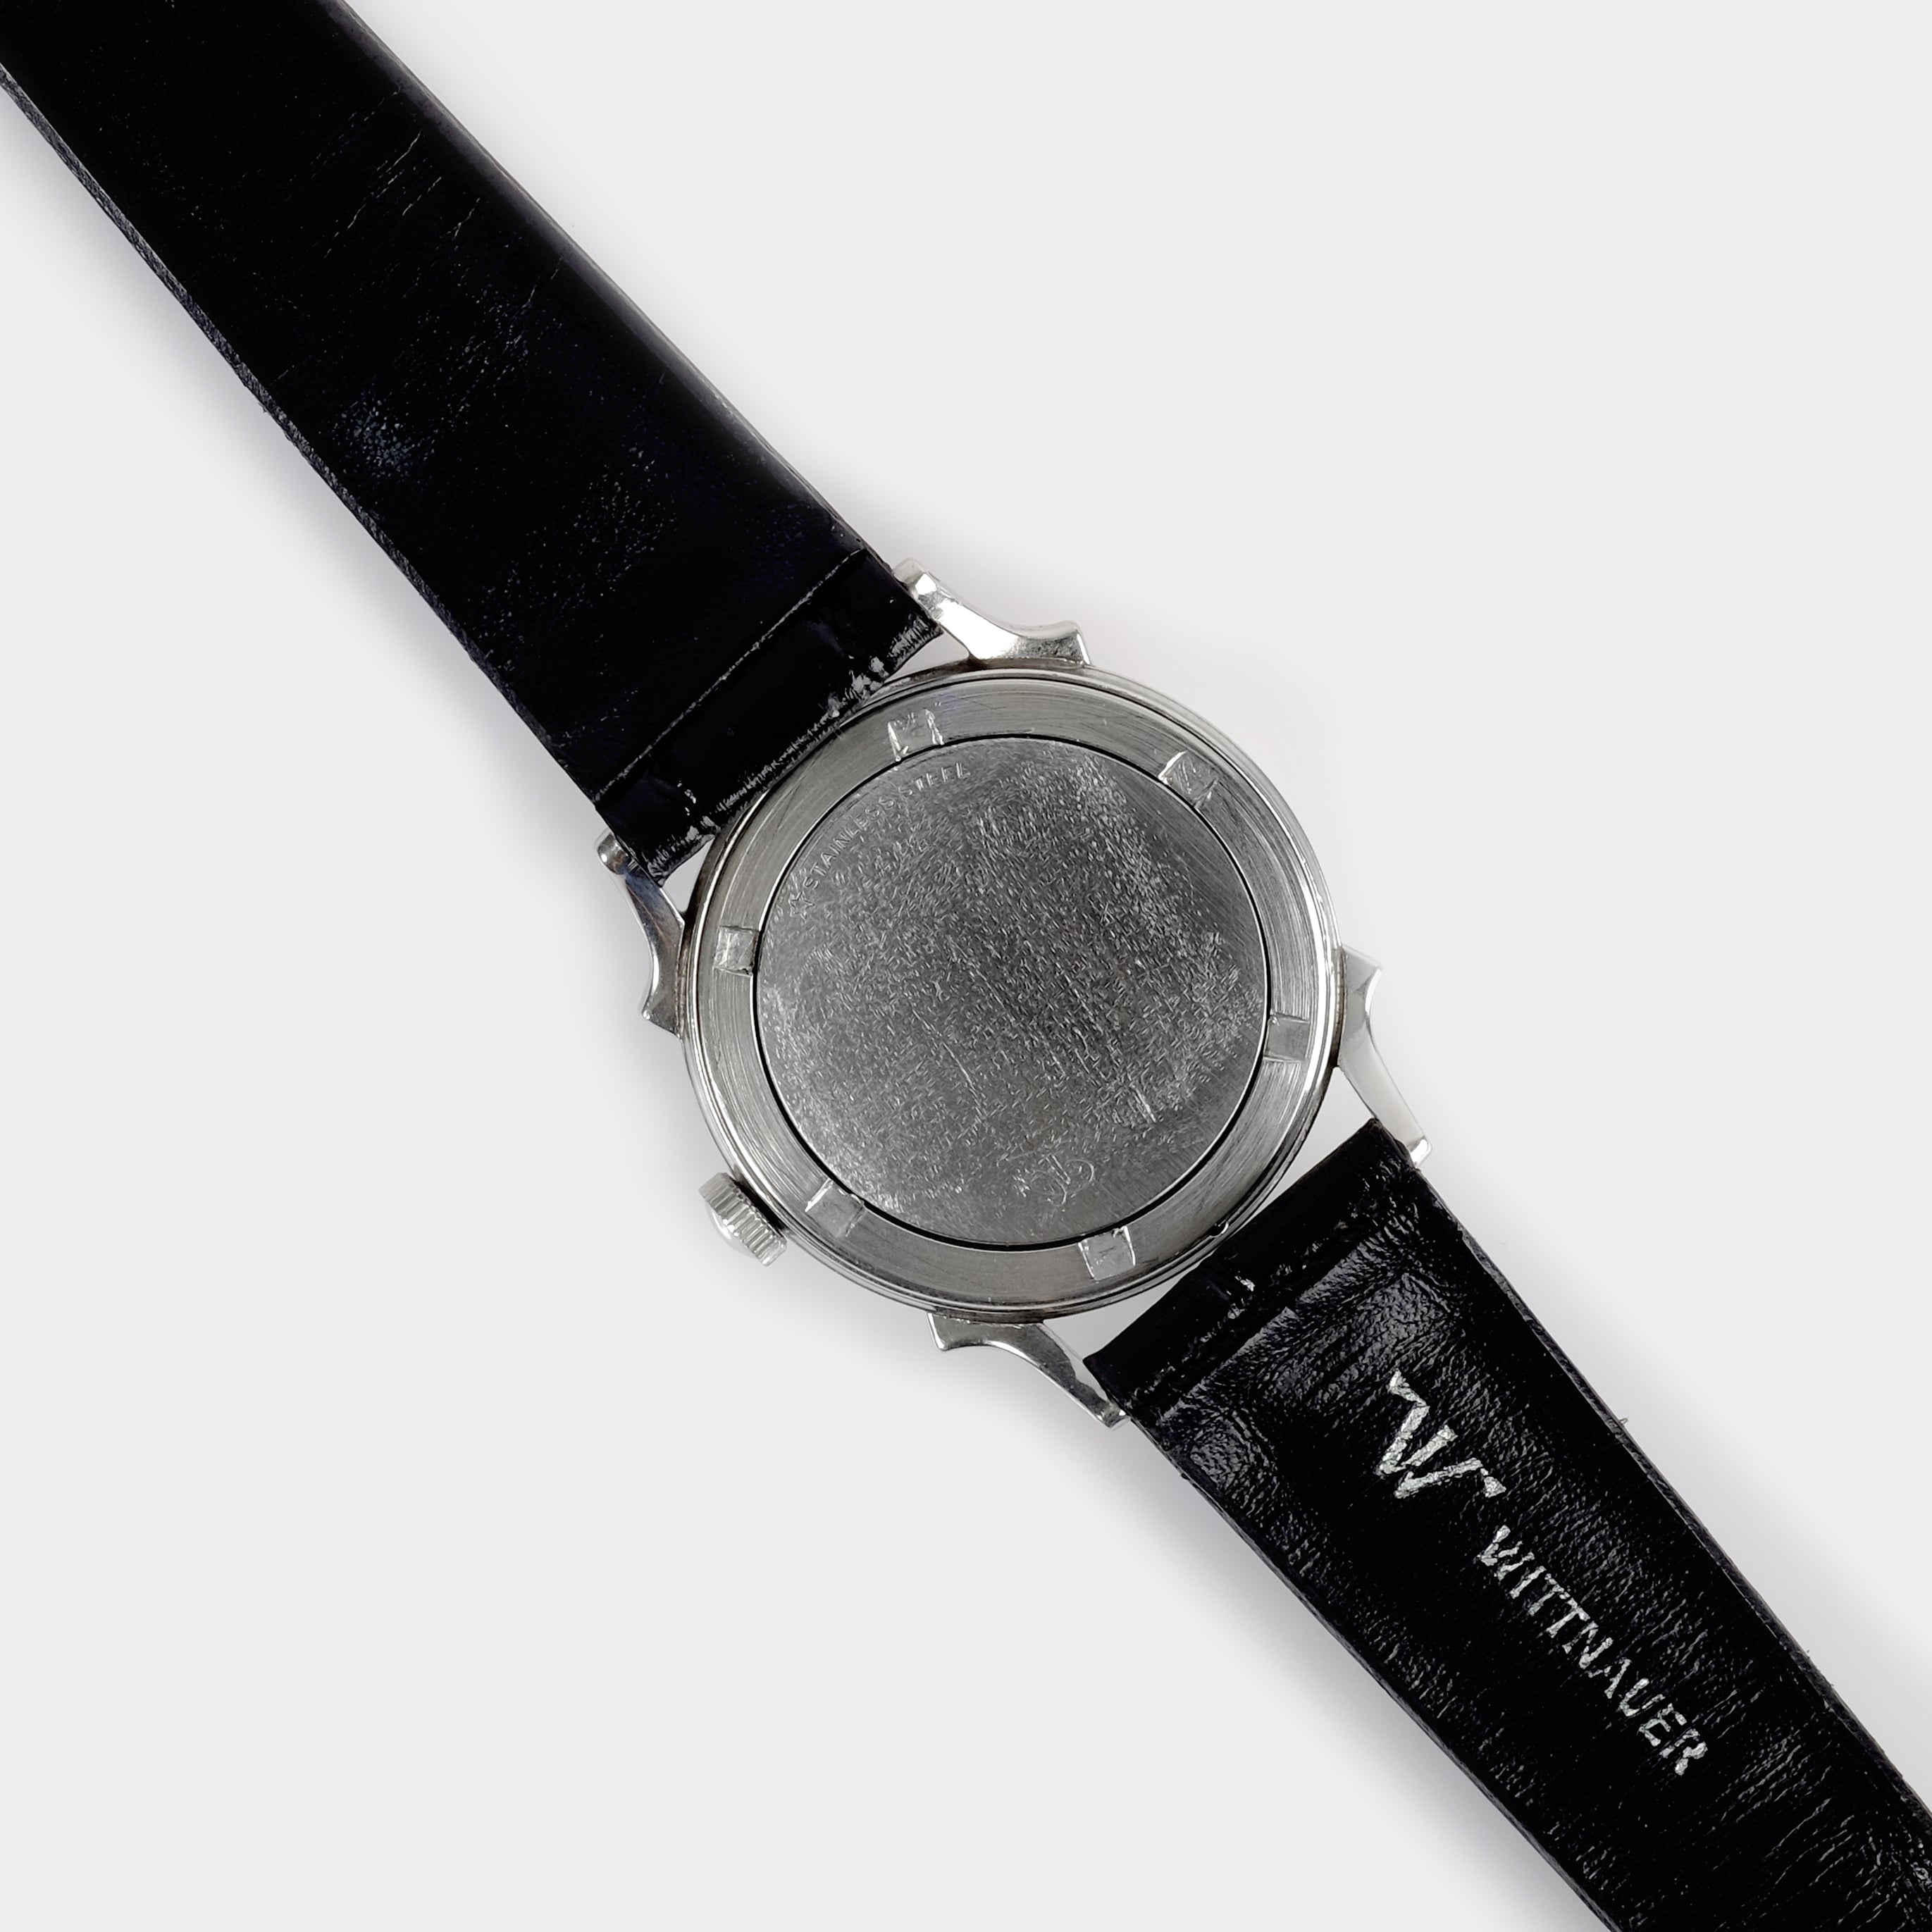 Wittnauer Time-Only Manual-Wind ref. 2065-SW Circa 1950s Wristwatch